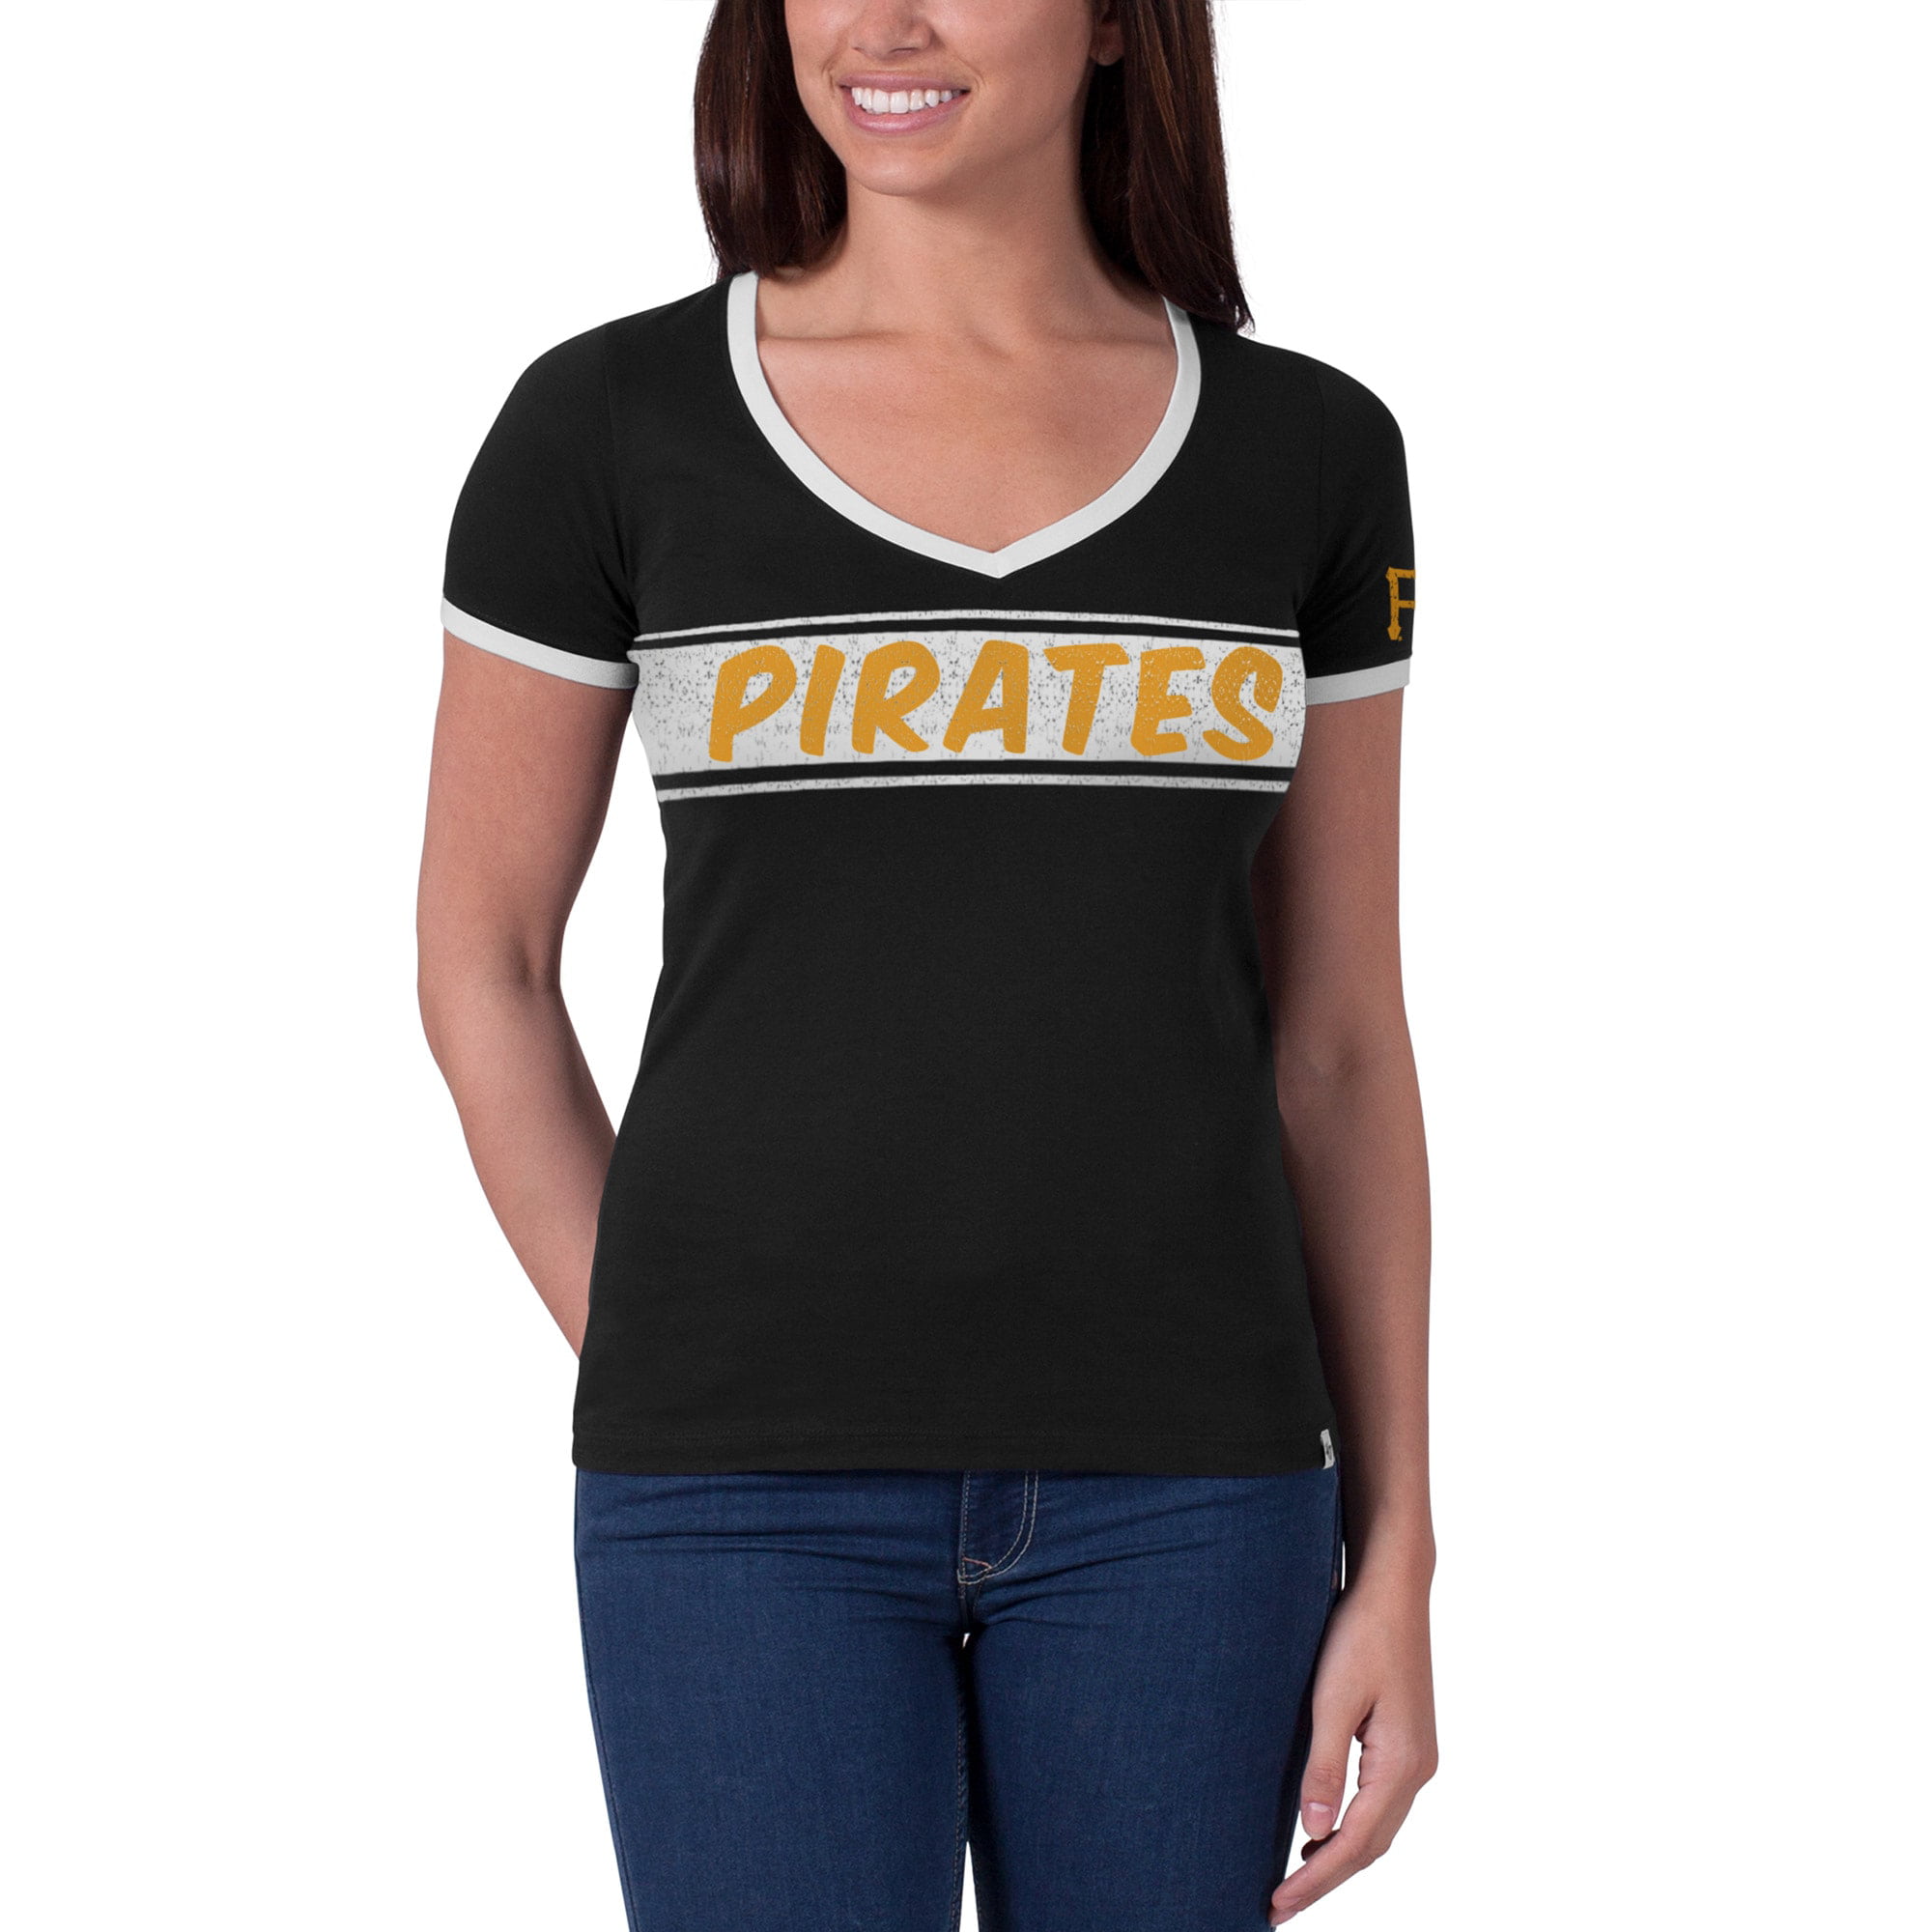 fly pirates jersey